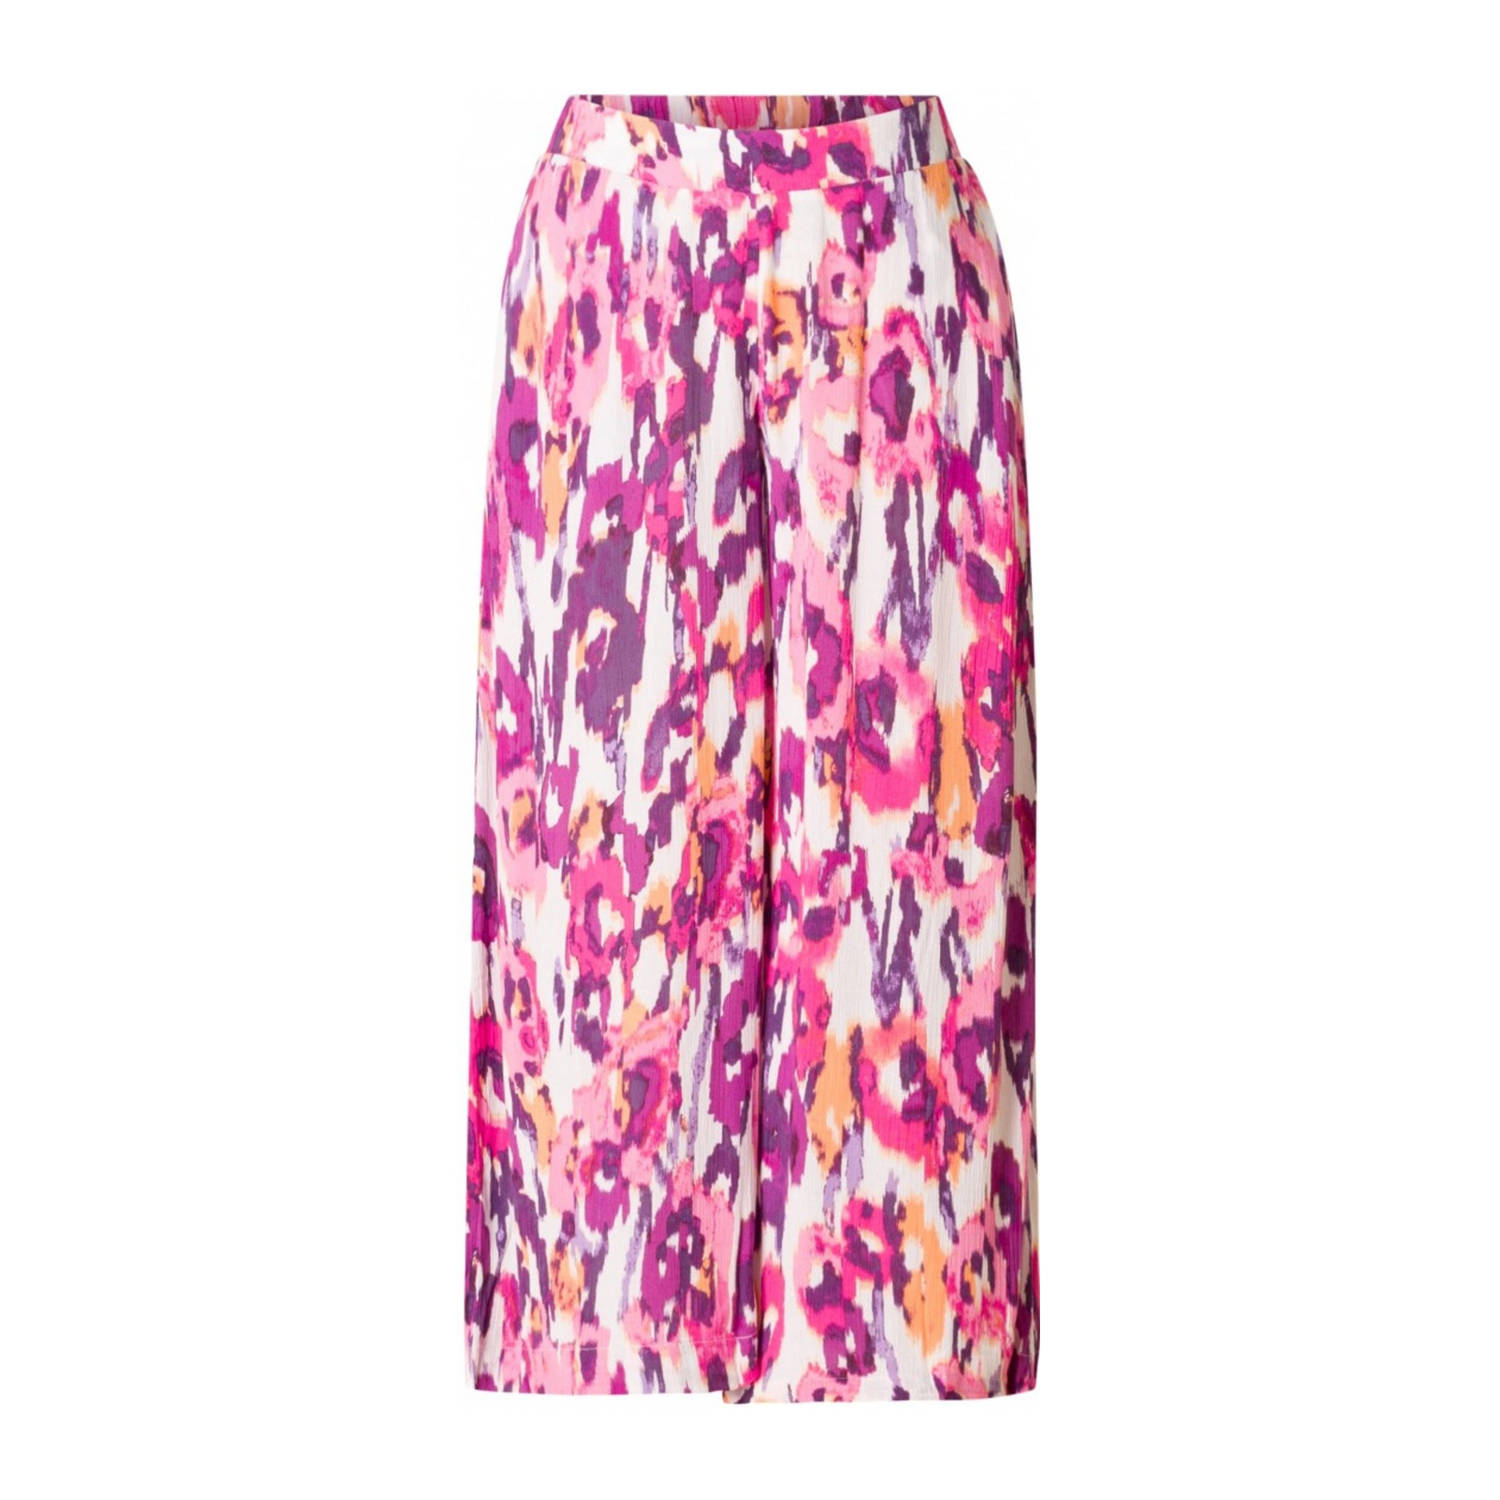 Yest high waist loose fit broek met all over print roze fuchsia wit